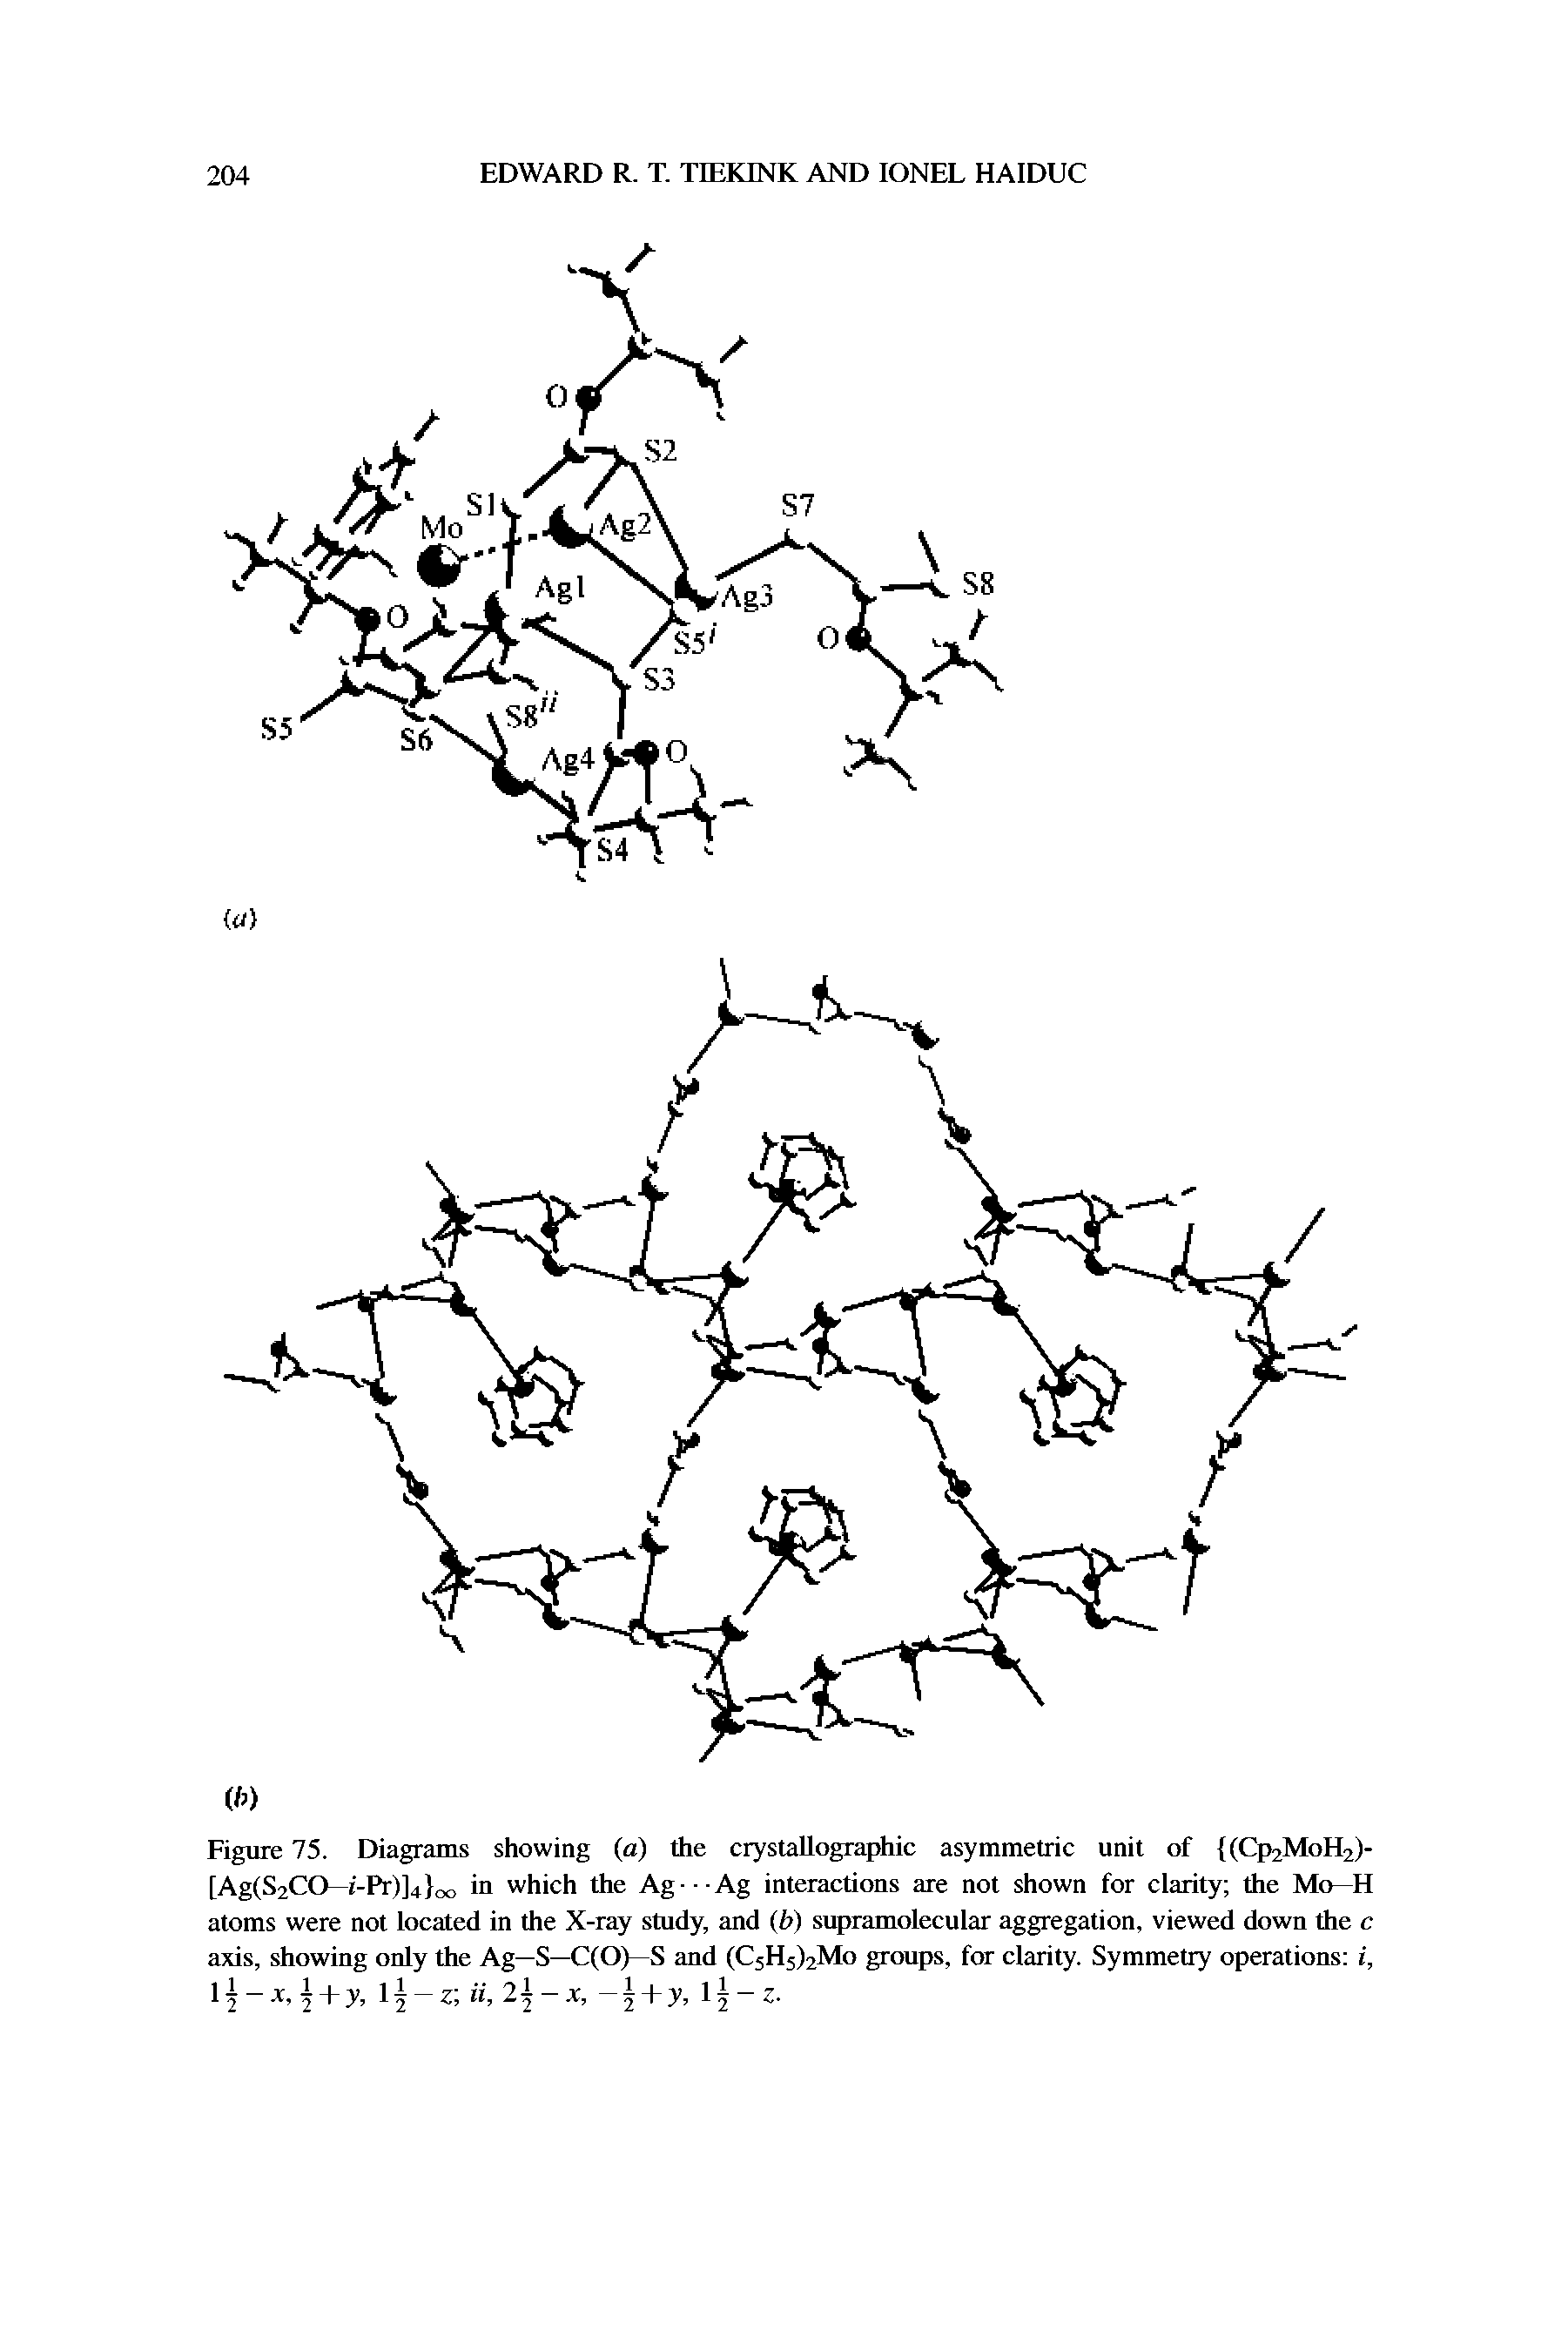 Figure 75. Diagrams showing (a) the crystallographic asymmetric unit of (Cp2MoH2)-[Ag(S2CO—i-Pr)]4 oo in which the Ag - Ag interactions are not shown for clarity the Mo—H atoms were not located in the X-ray study, and (b) supramolecular aggregation, viewed down the c axis, showing only the Ag—S—C(O)—S and (C5H5)2Mo groups, for clarity. Symmetry operations i,...